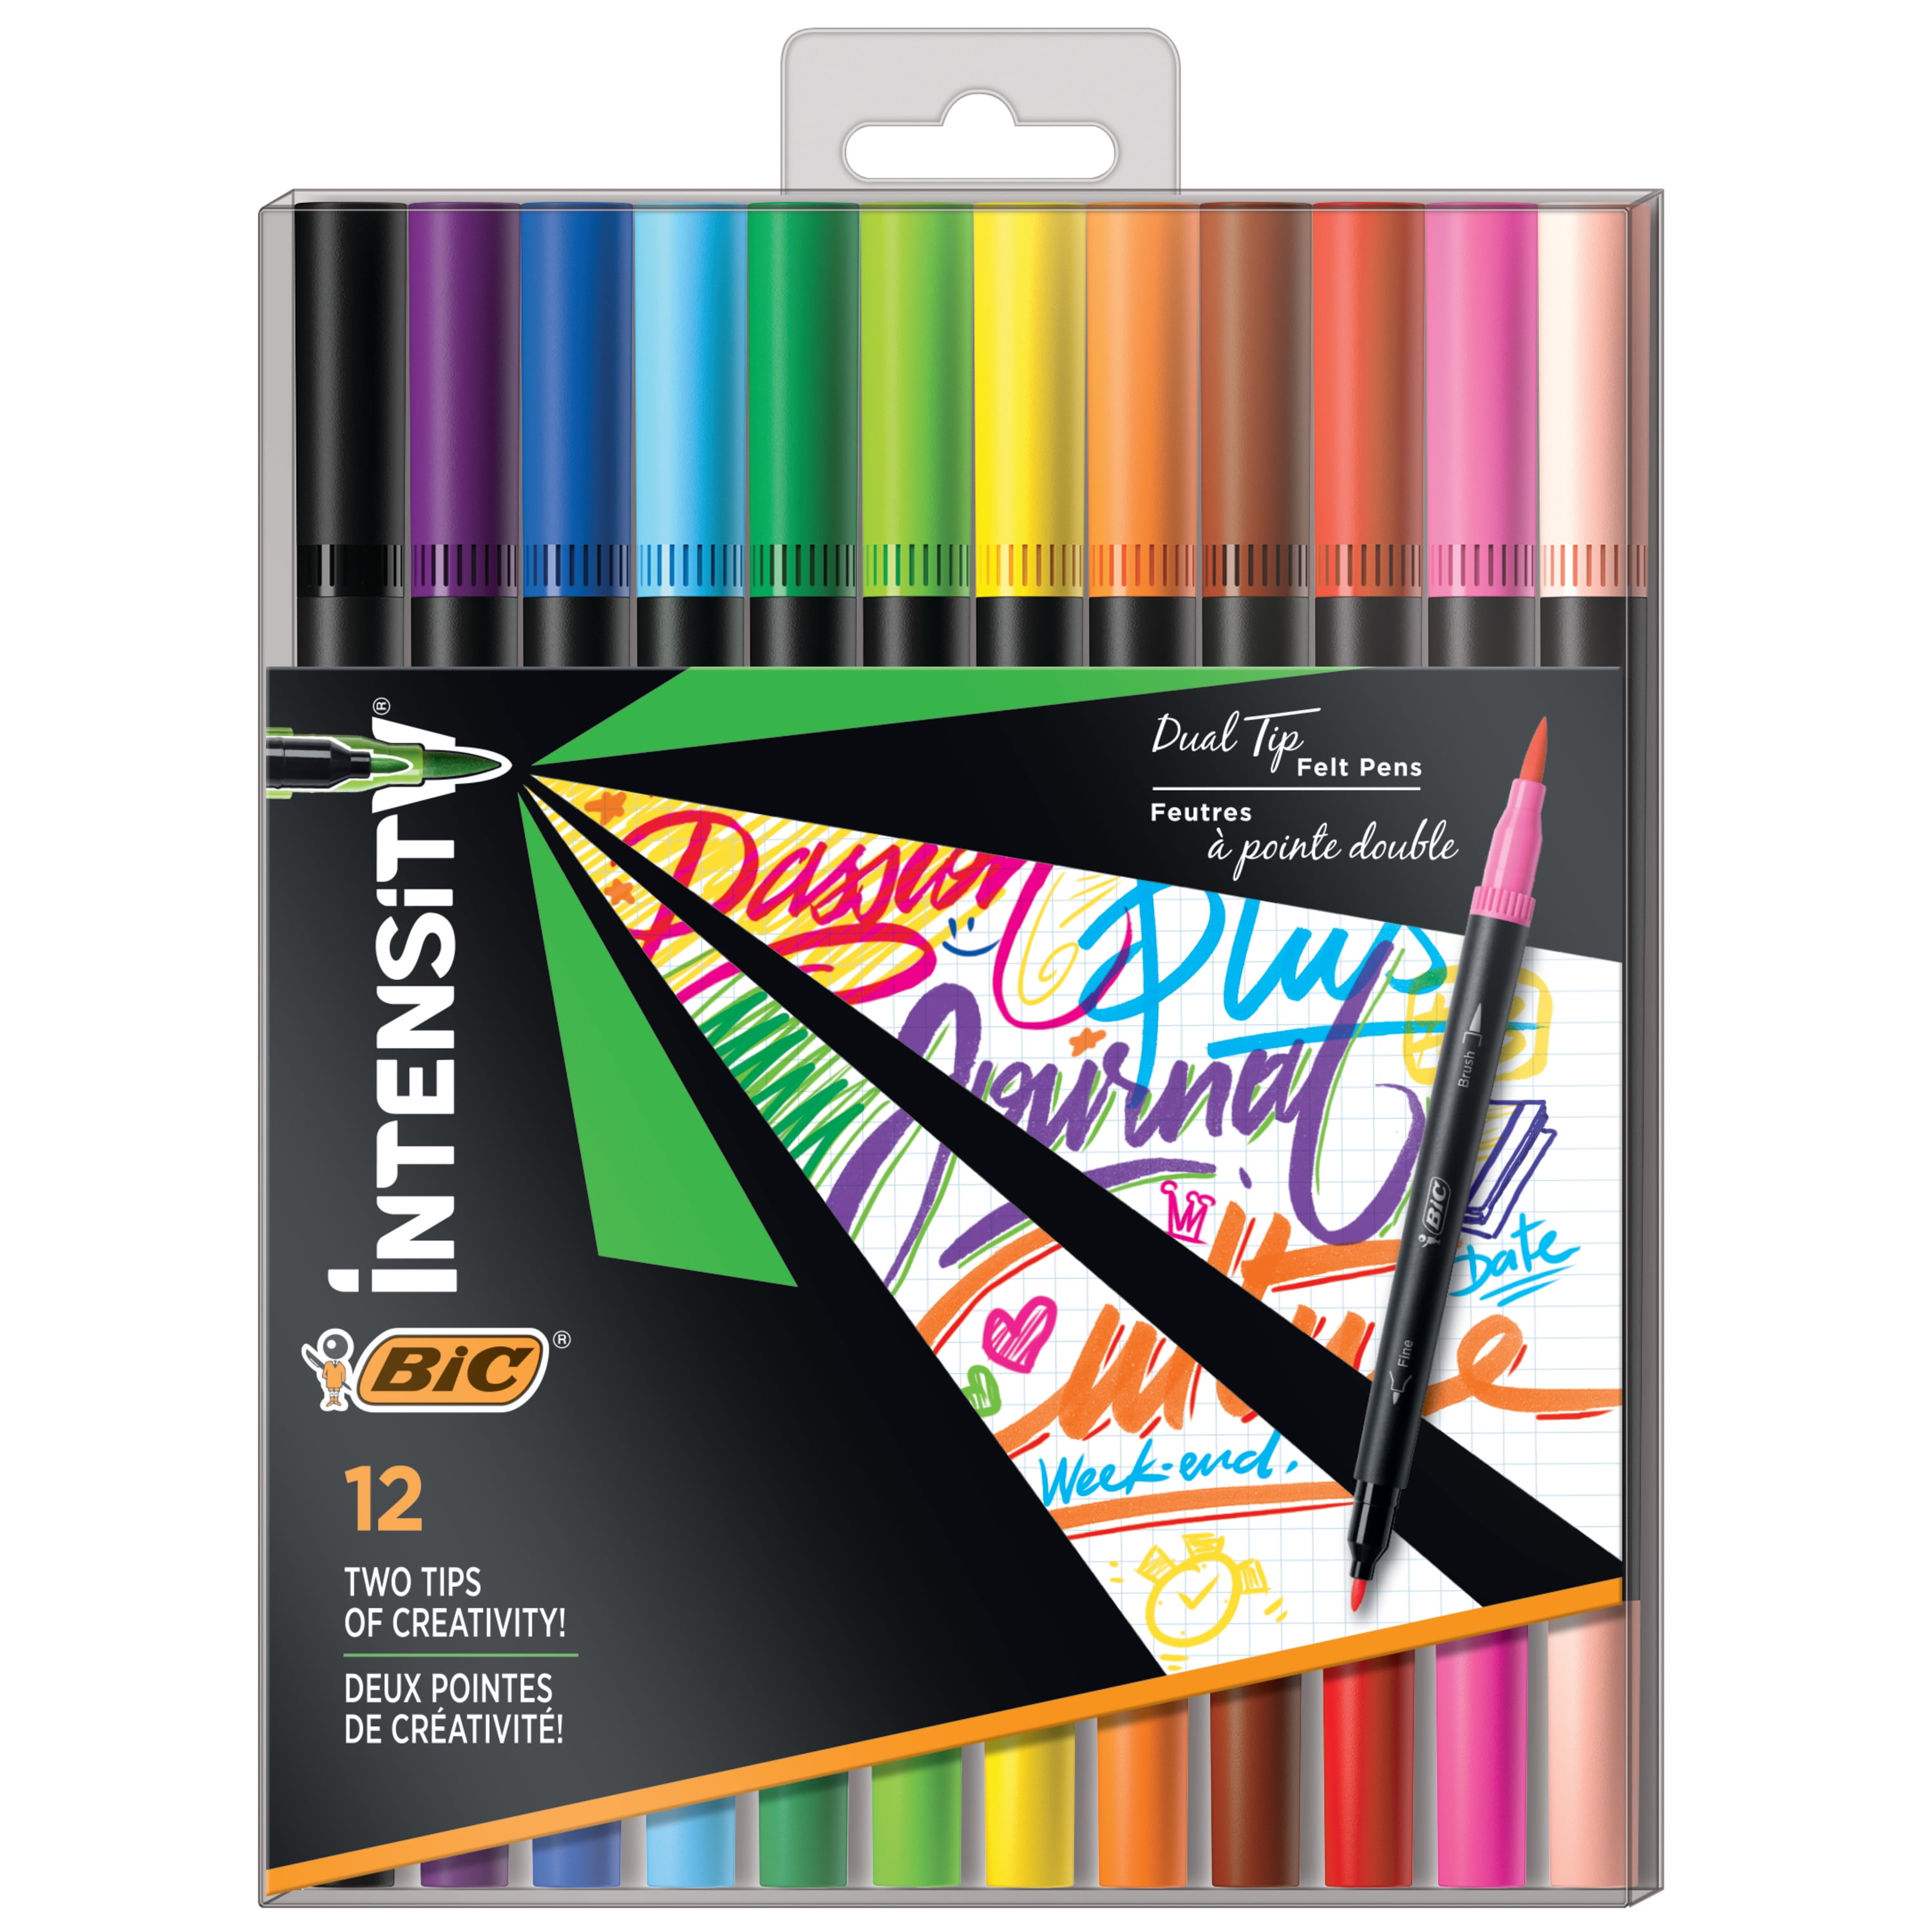 Tombow Dual End Brush Pen - [PACK OF 12] - First Color Assortment